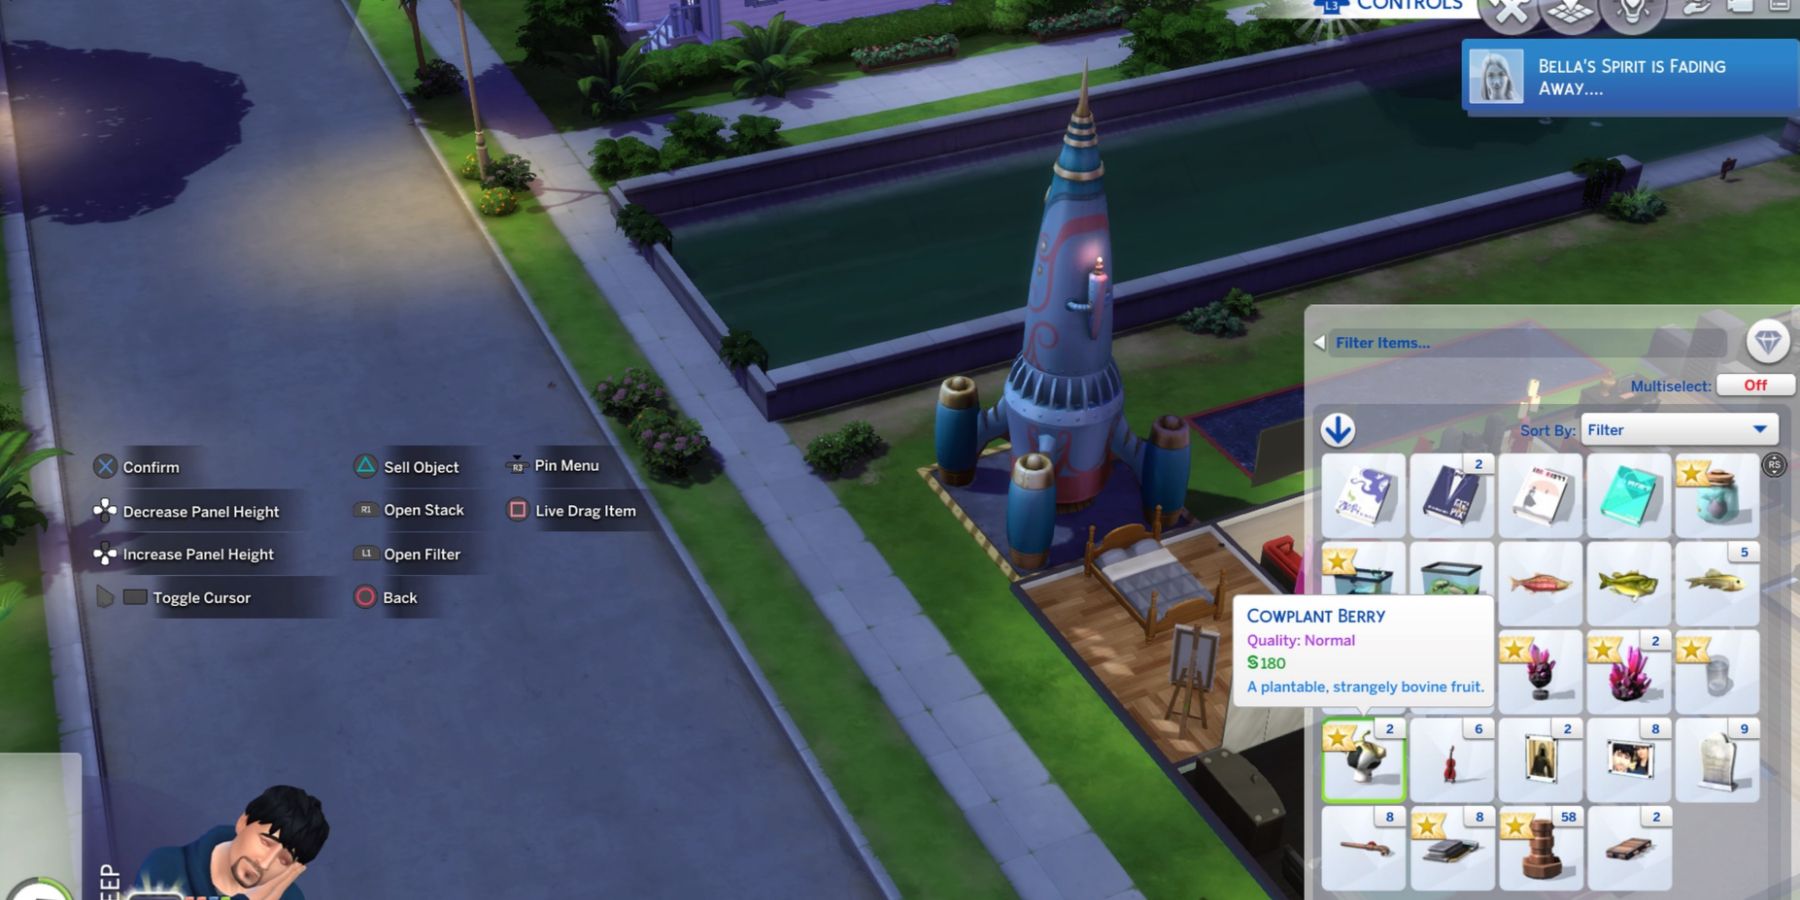 A Cowplant Berry in The Sims 4